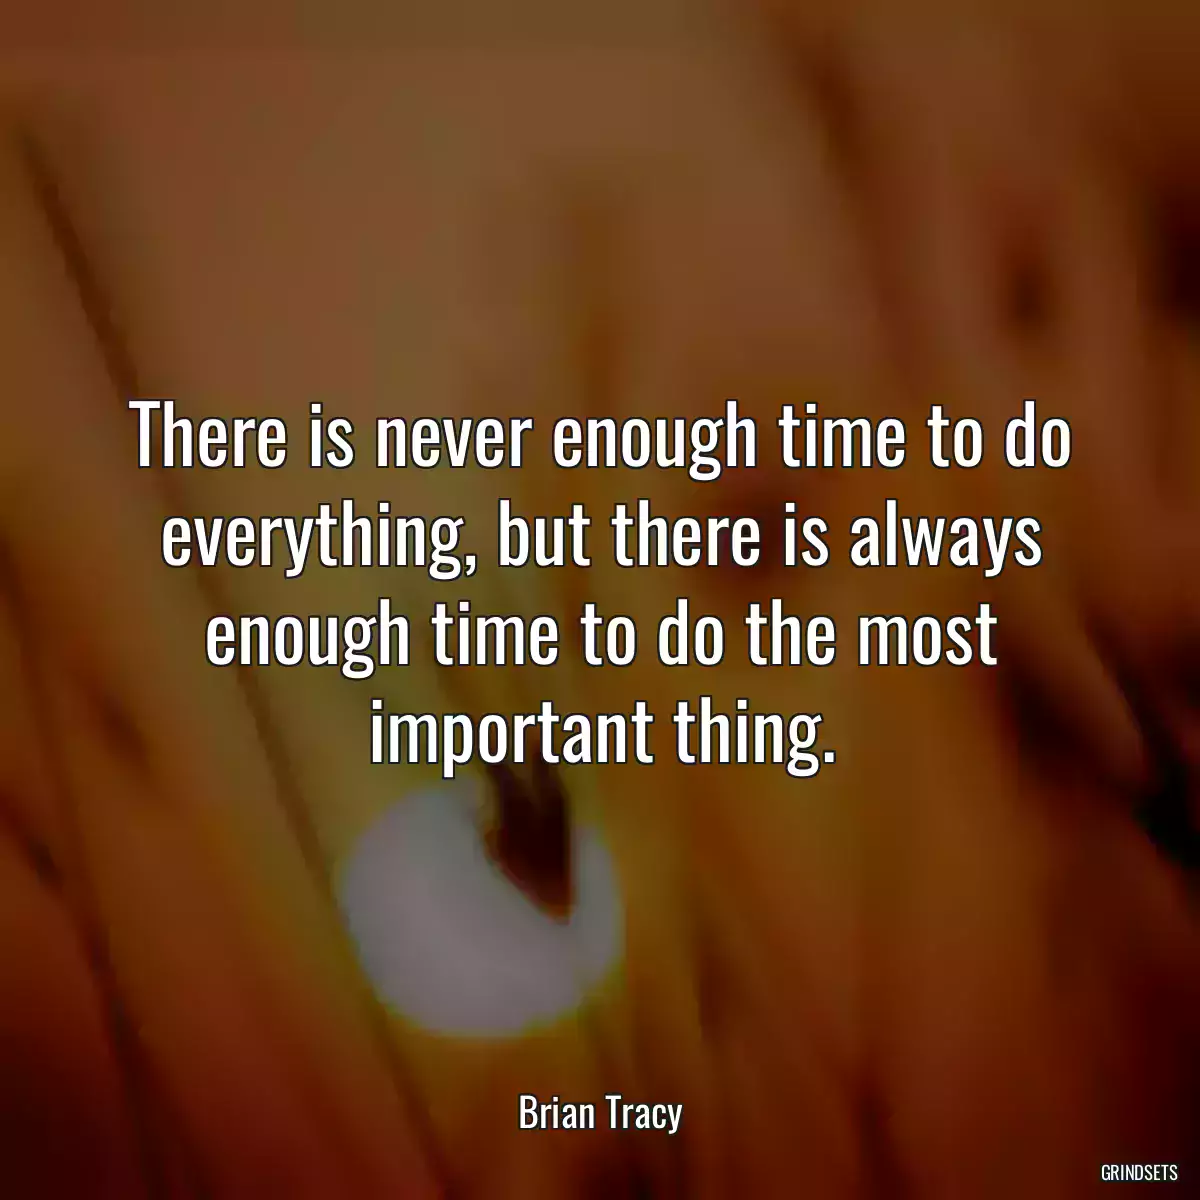 There is never enough time to do everything, but there is always enough time to do the most important thing.